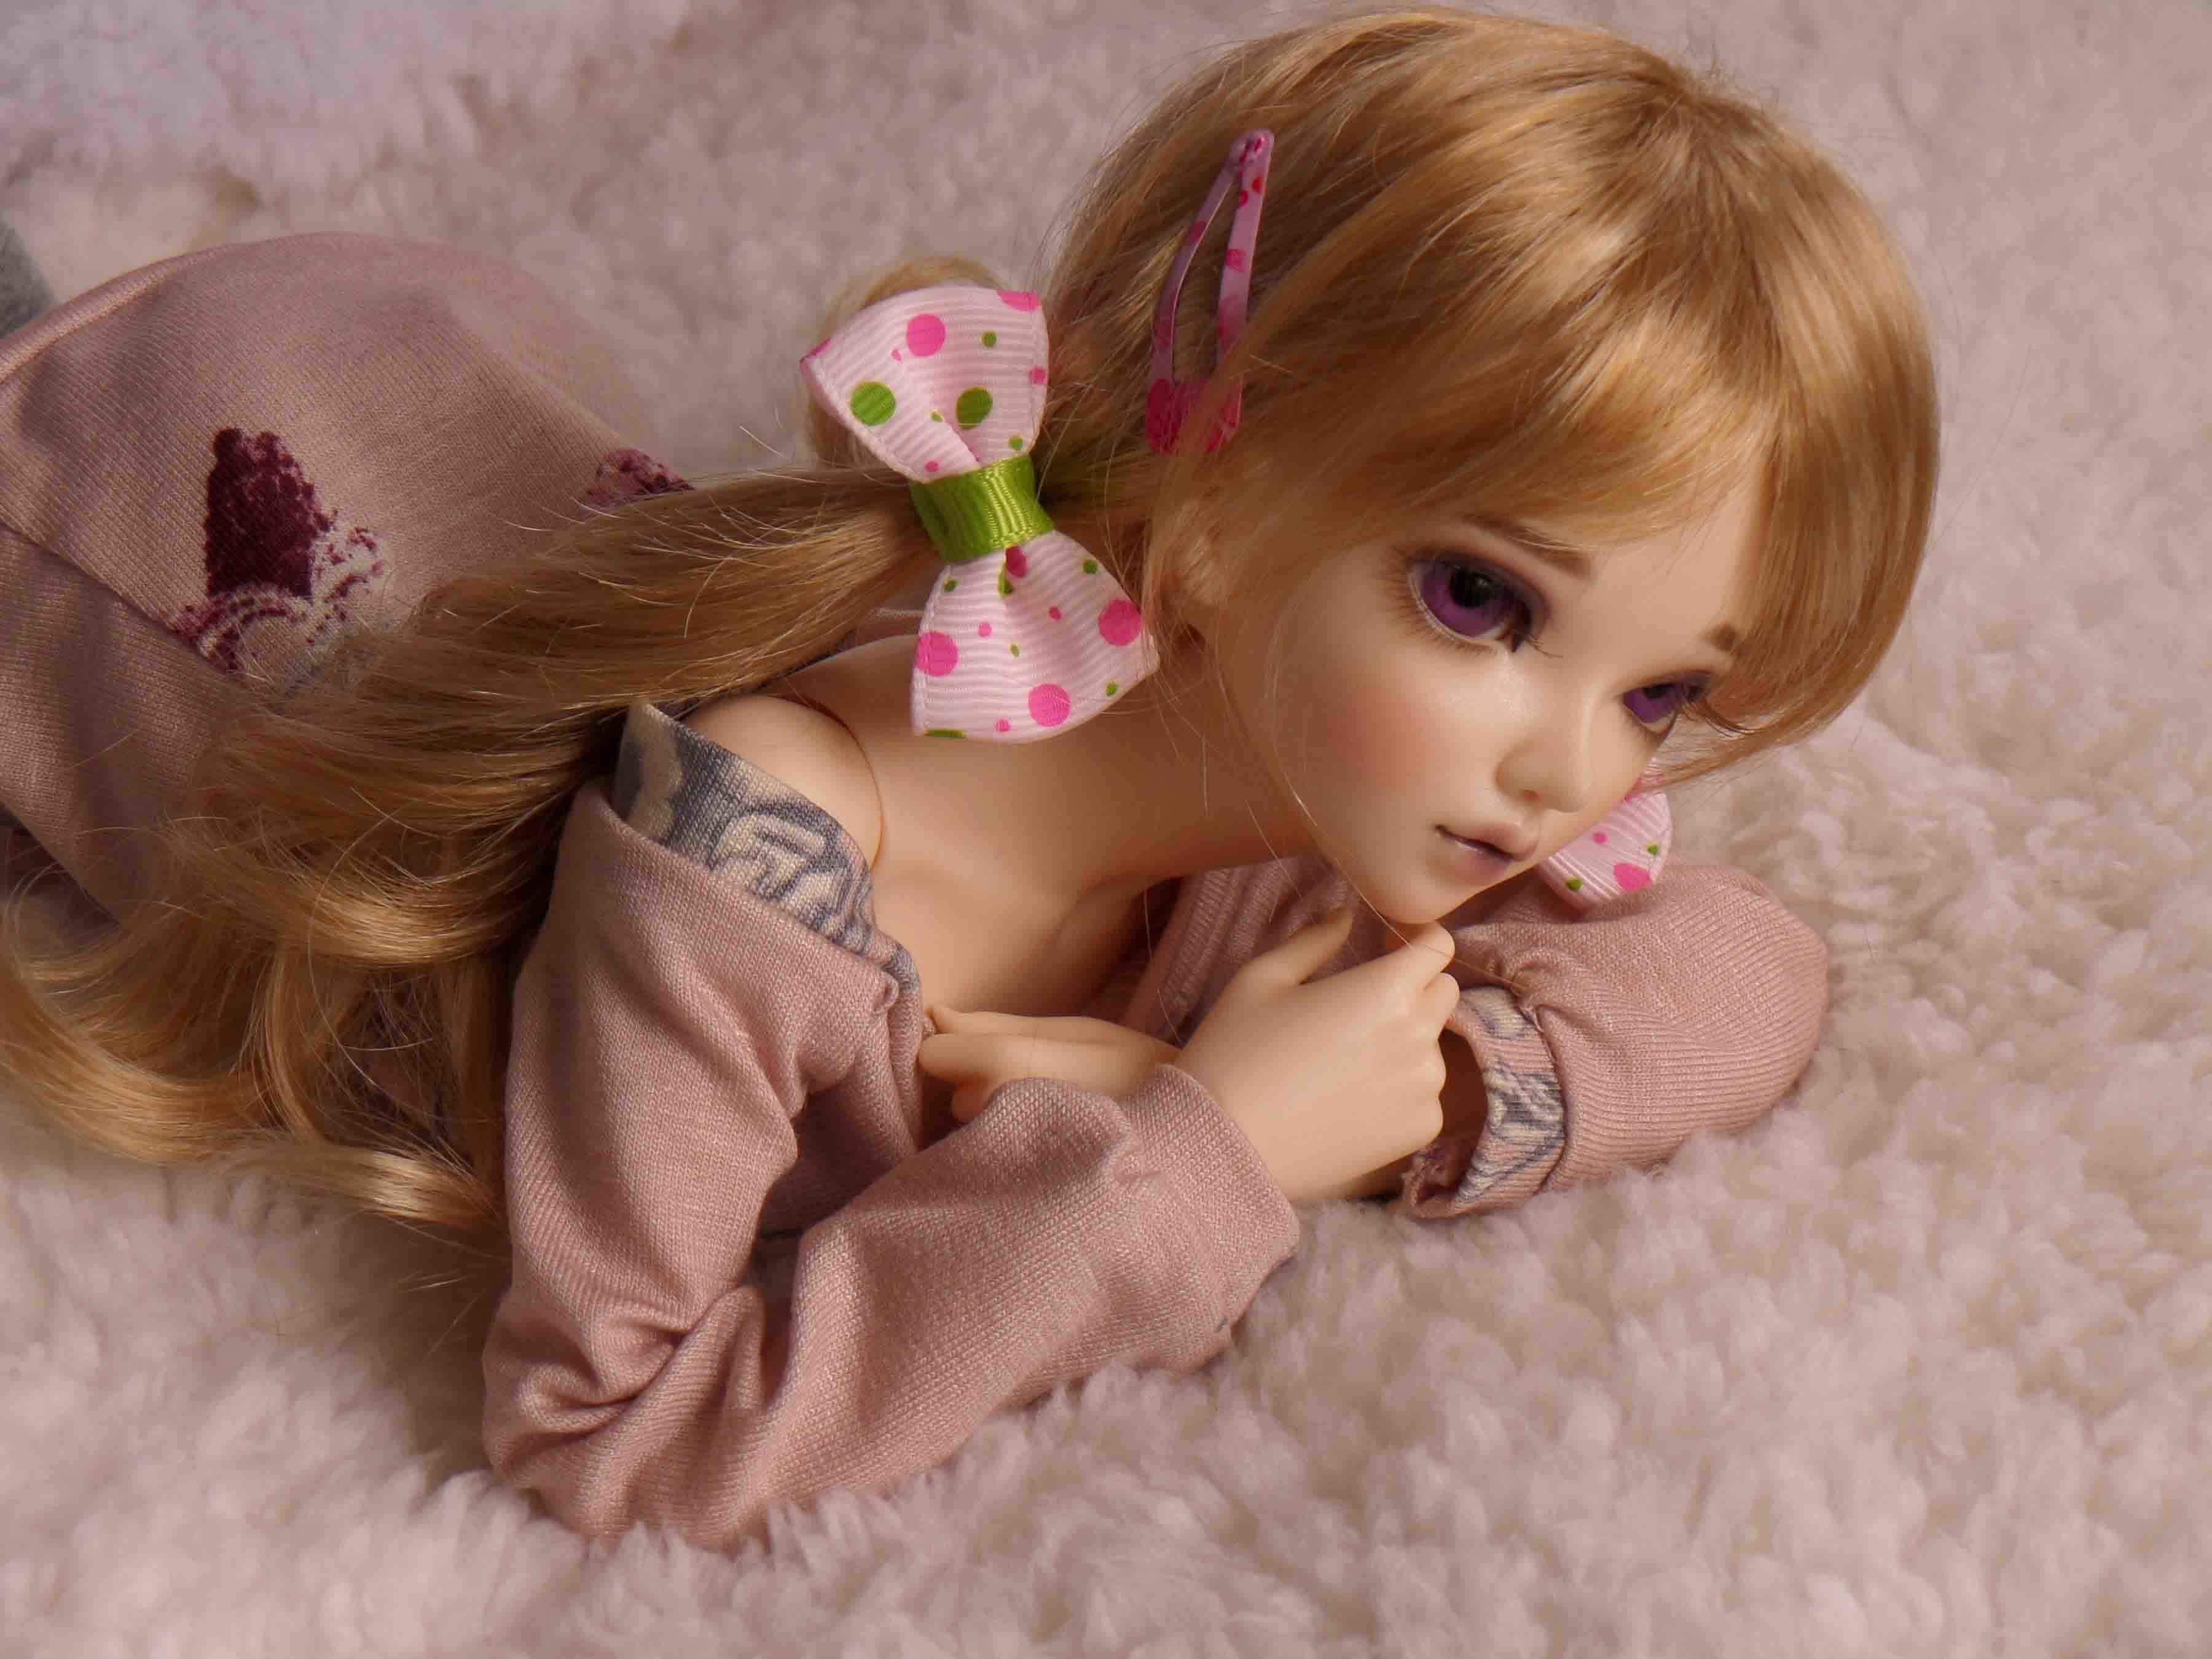 Barbie Doll Latest HD Wallpapers Free Download 3600x2700